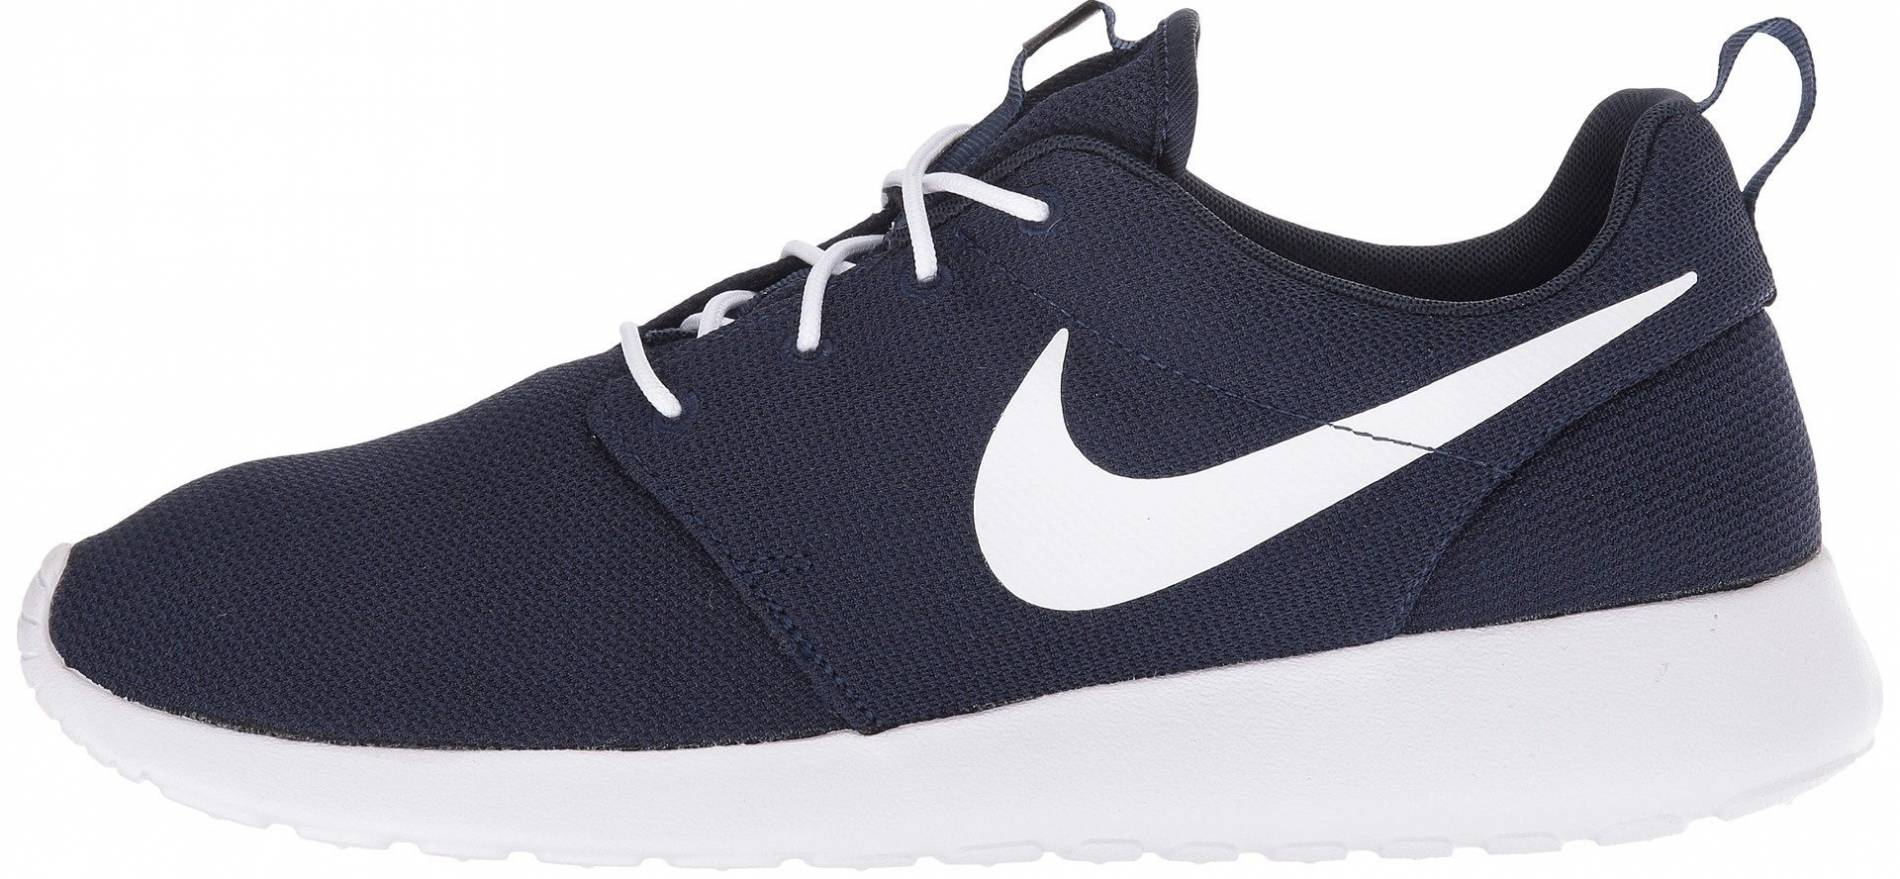 navy blue and grey nike shoes